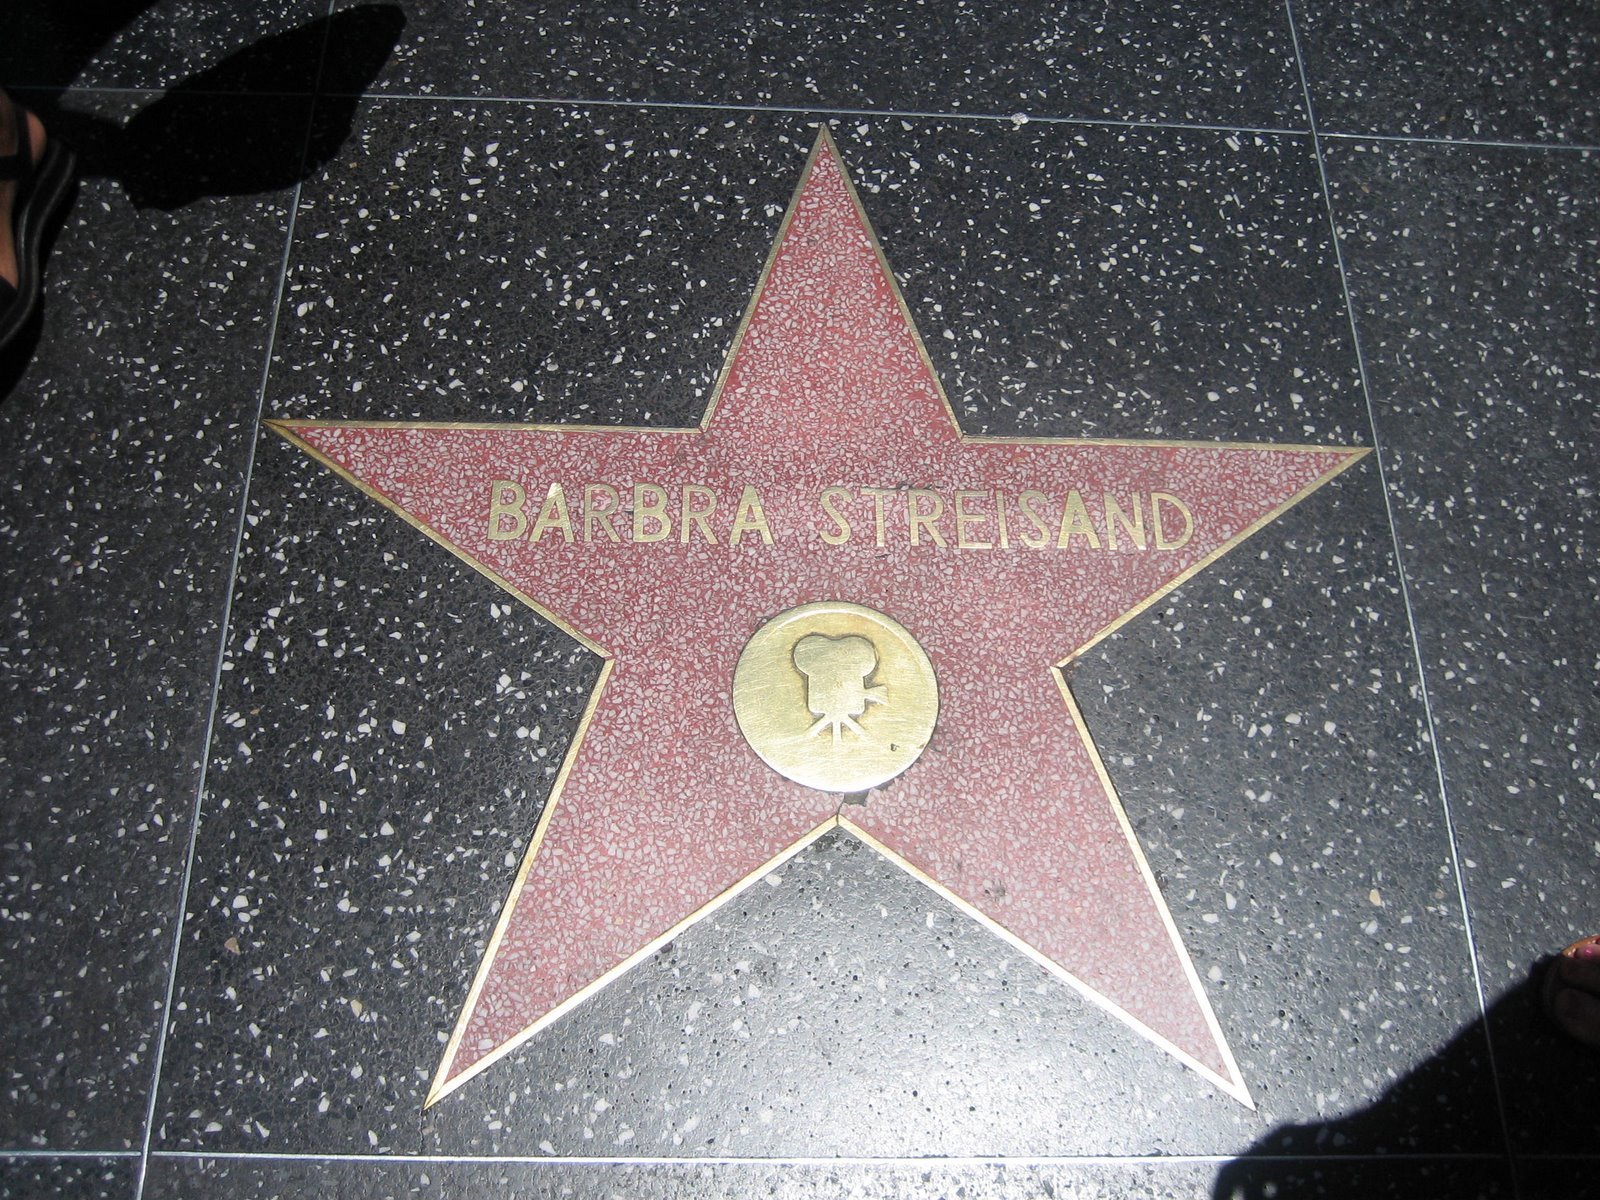 Barbra Streisand Image Walk Of Fame HD Wallpaper And Background